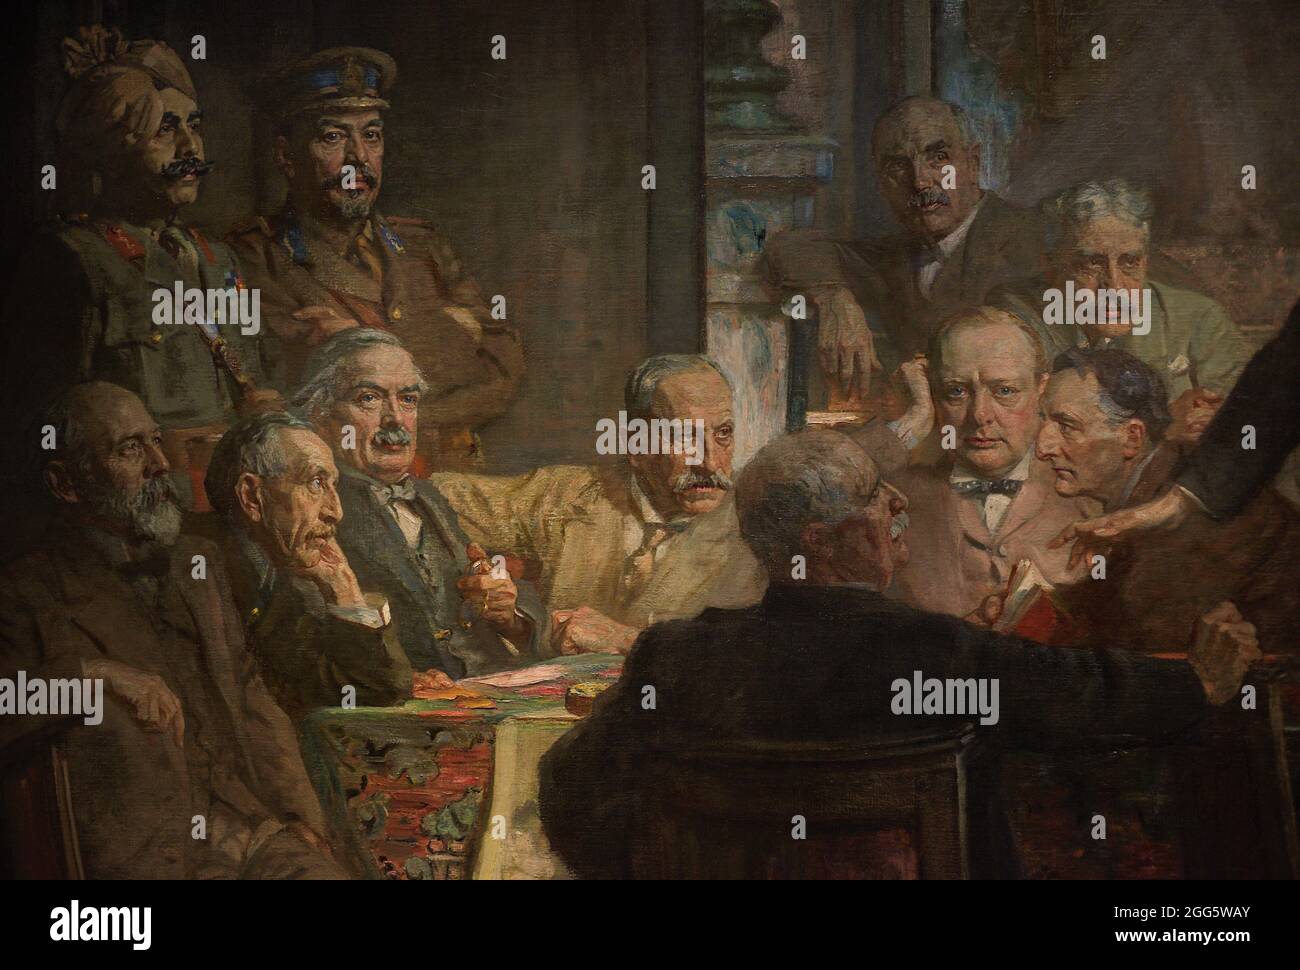 Statesmen of World War I. From left to right, seated at the table: Joseph Cook, William Morris Hughes, David Lloyd George, Alfred Milner, Winston Churchill, Edward Gray and William Ferguson Massey (with their backs turned). Standing: Ganga Singh (Maharaja of Bikaner), Louis Botha, George Nicoll Barnes (behind Churchill) and Robert Laird Borden. Painting by James Guthrie (1859-1930). Oil on canvas (396,2 x 335,3 cm), 1924-1930. Detail. National Portrait Gallery. London, England, United Kingdom. Stock Photo